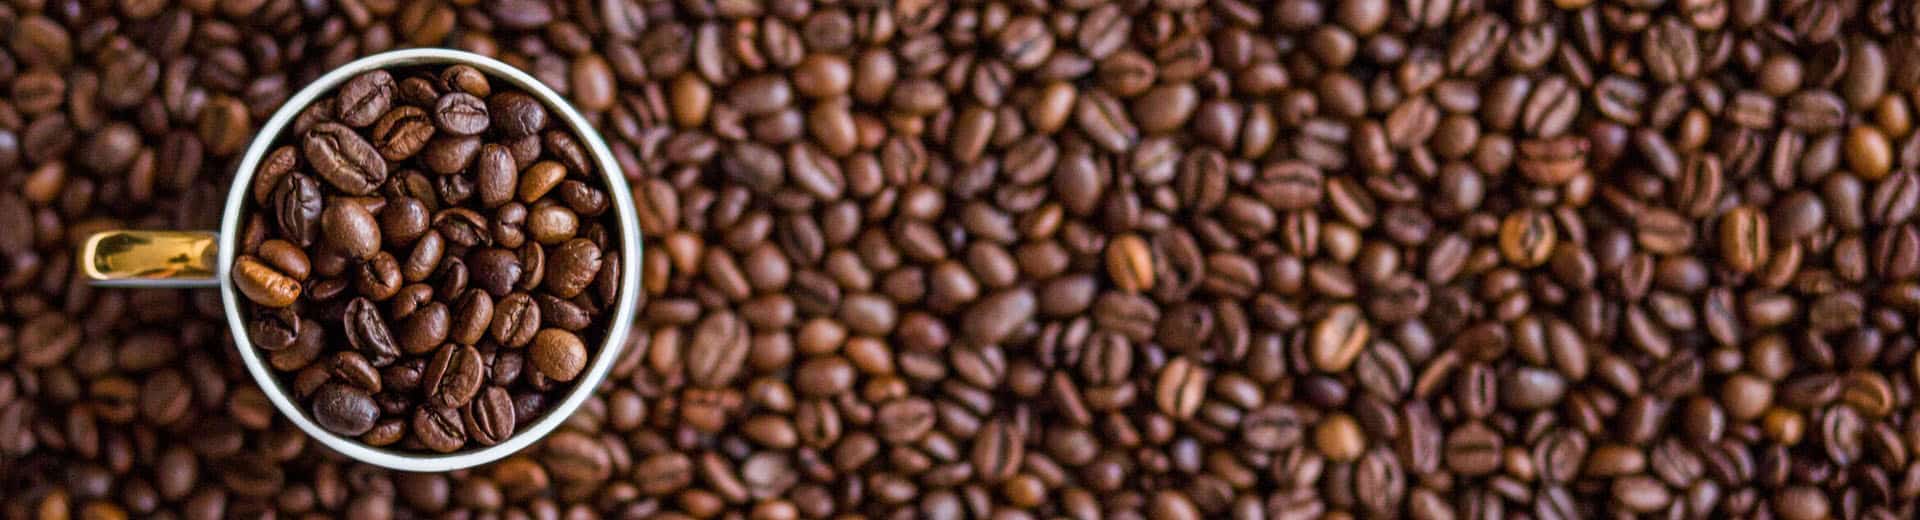 How Many Calories Are In Your Daily Cup of Coffee?